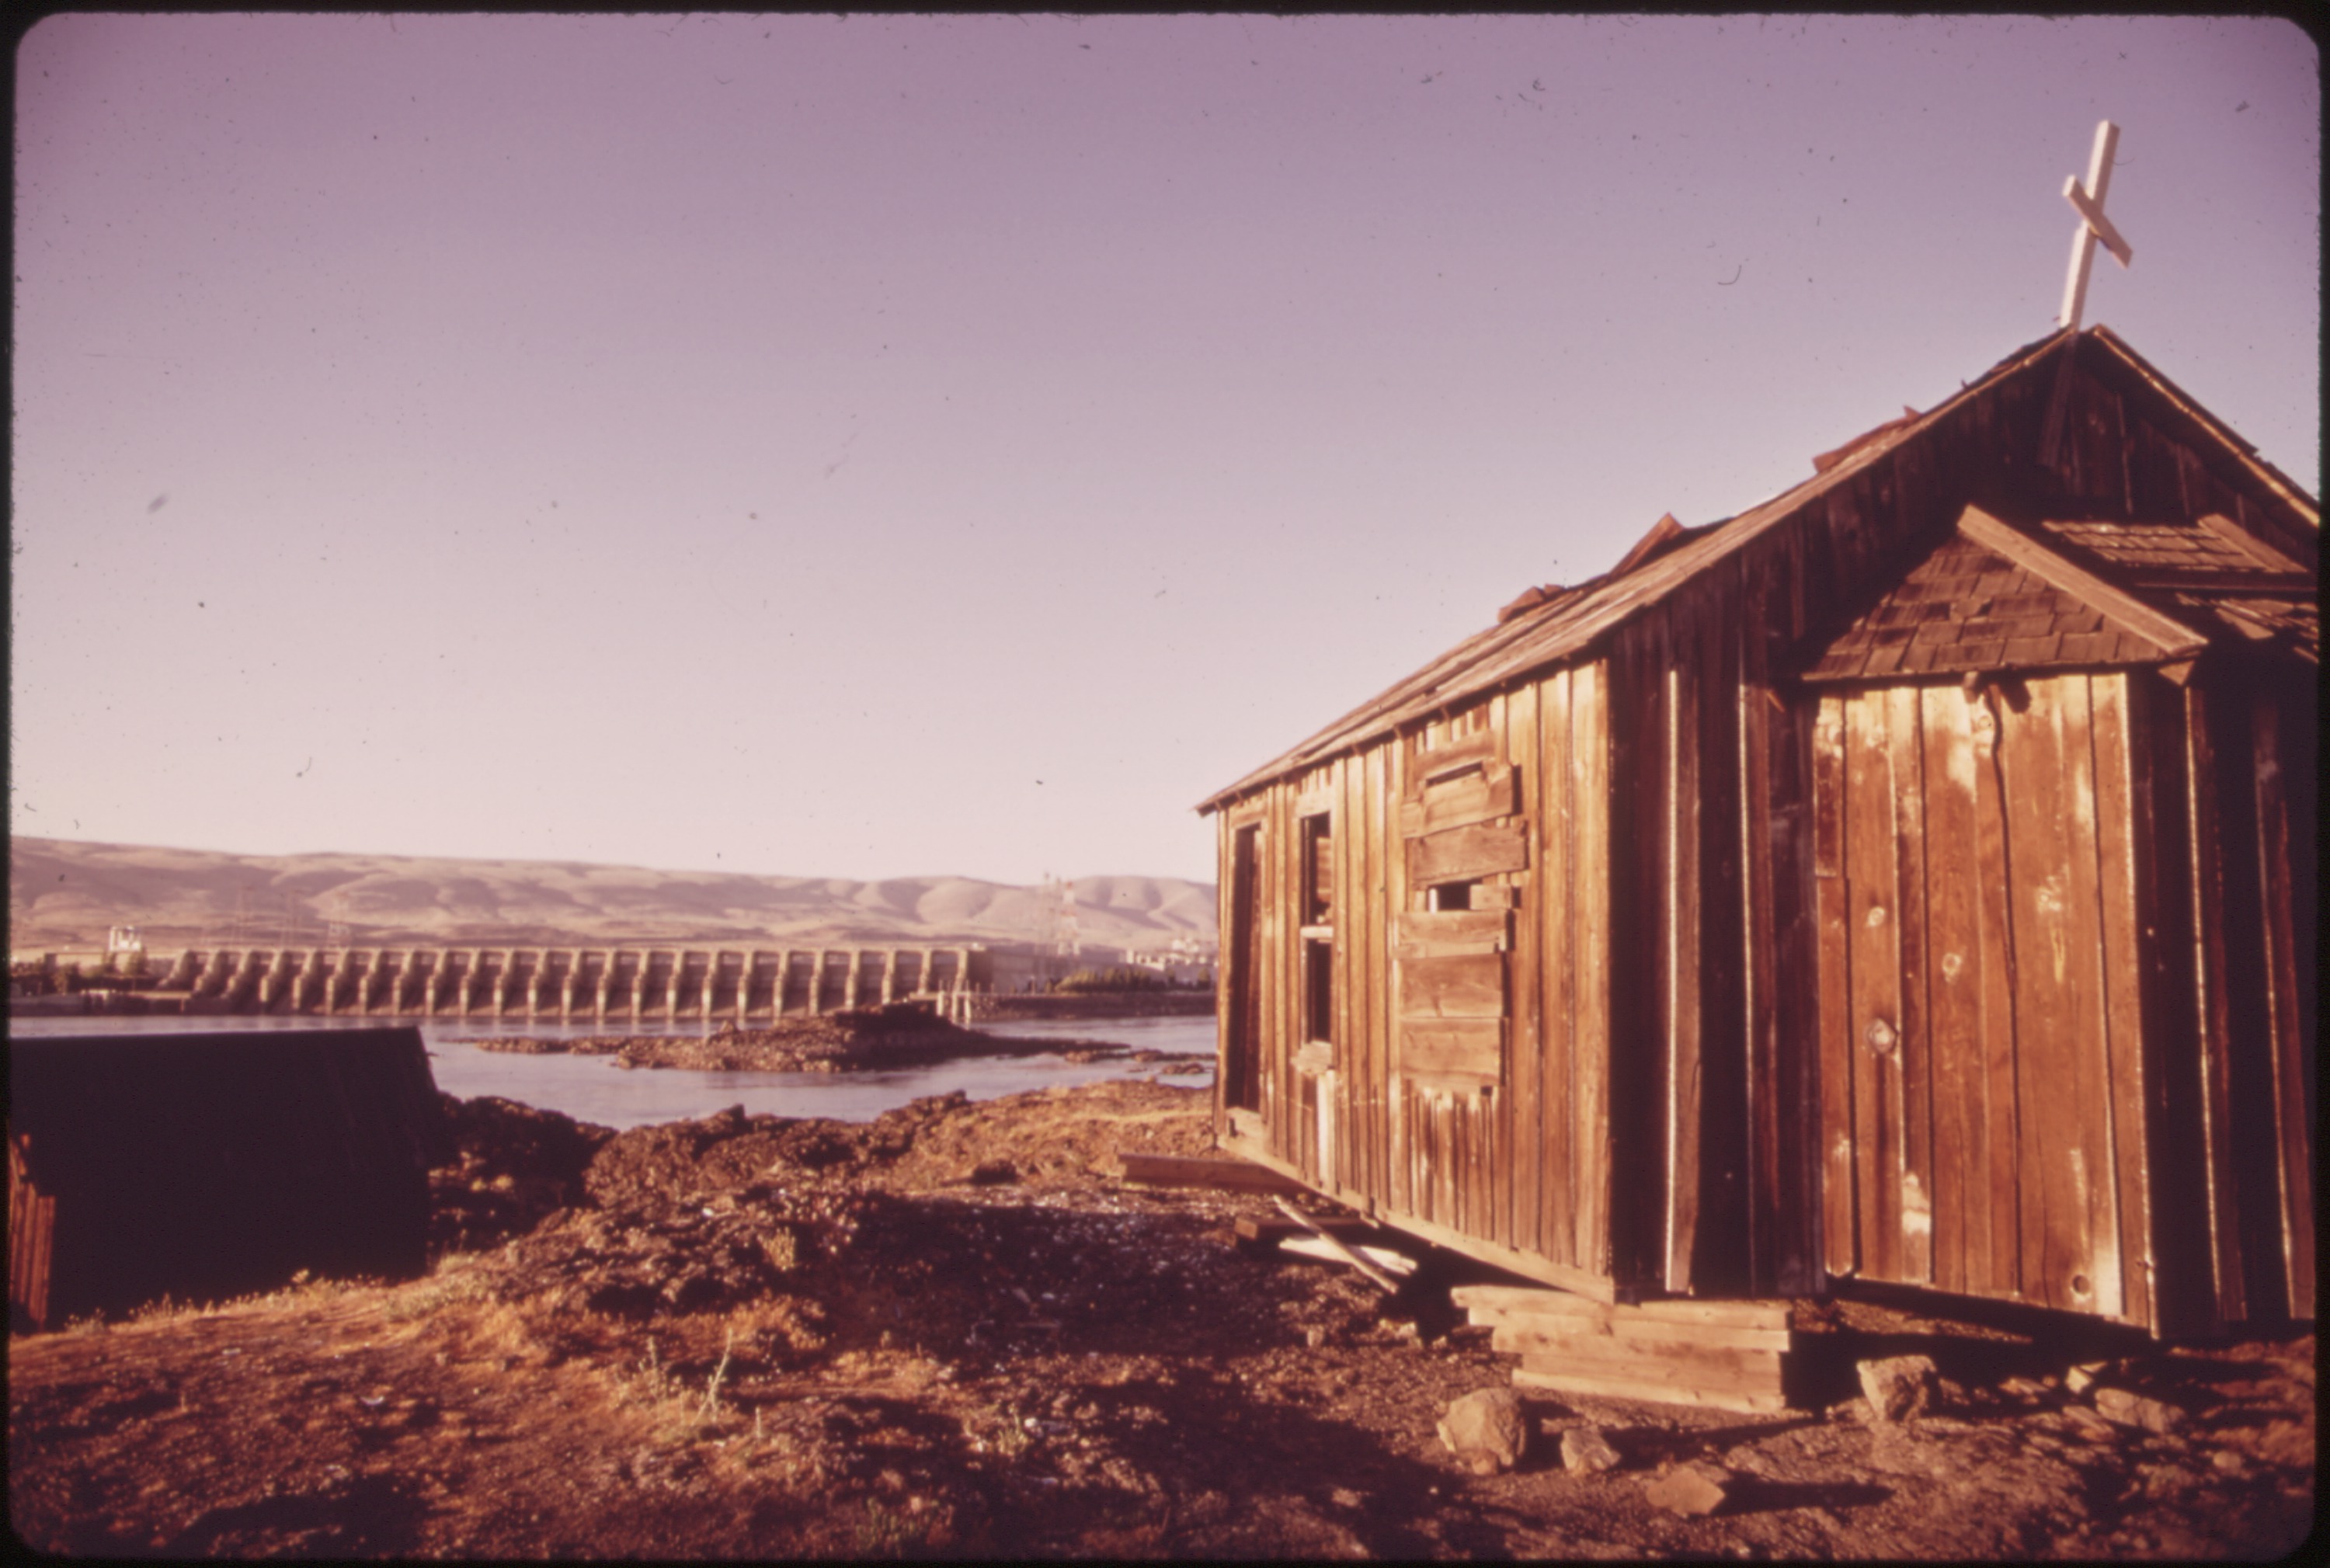 File:LAST REMNANT OF AN INDIAN FISHING VILLAGE ON THE WASHINGTON STATE SIDE  OF THE COLUMBIA RIVER. THE VILLAGE SITE IS - NARA - 548165.jpg -  Wikimedia Commons